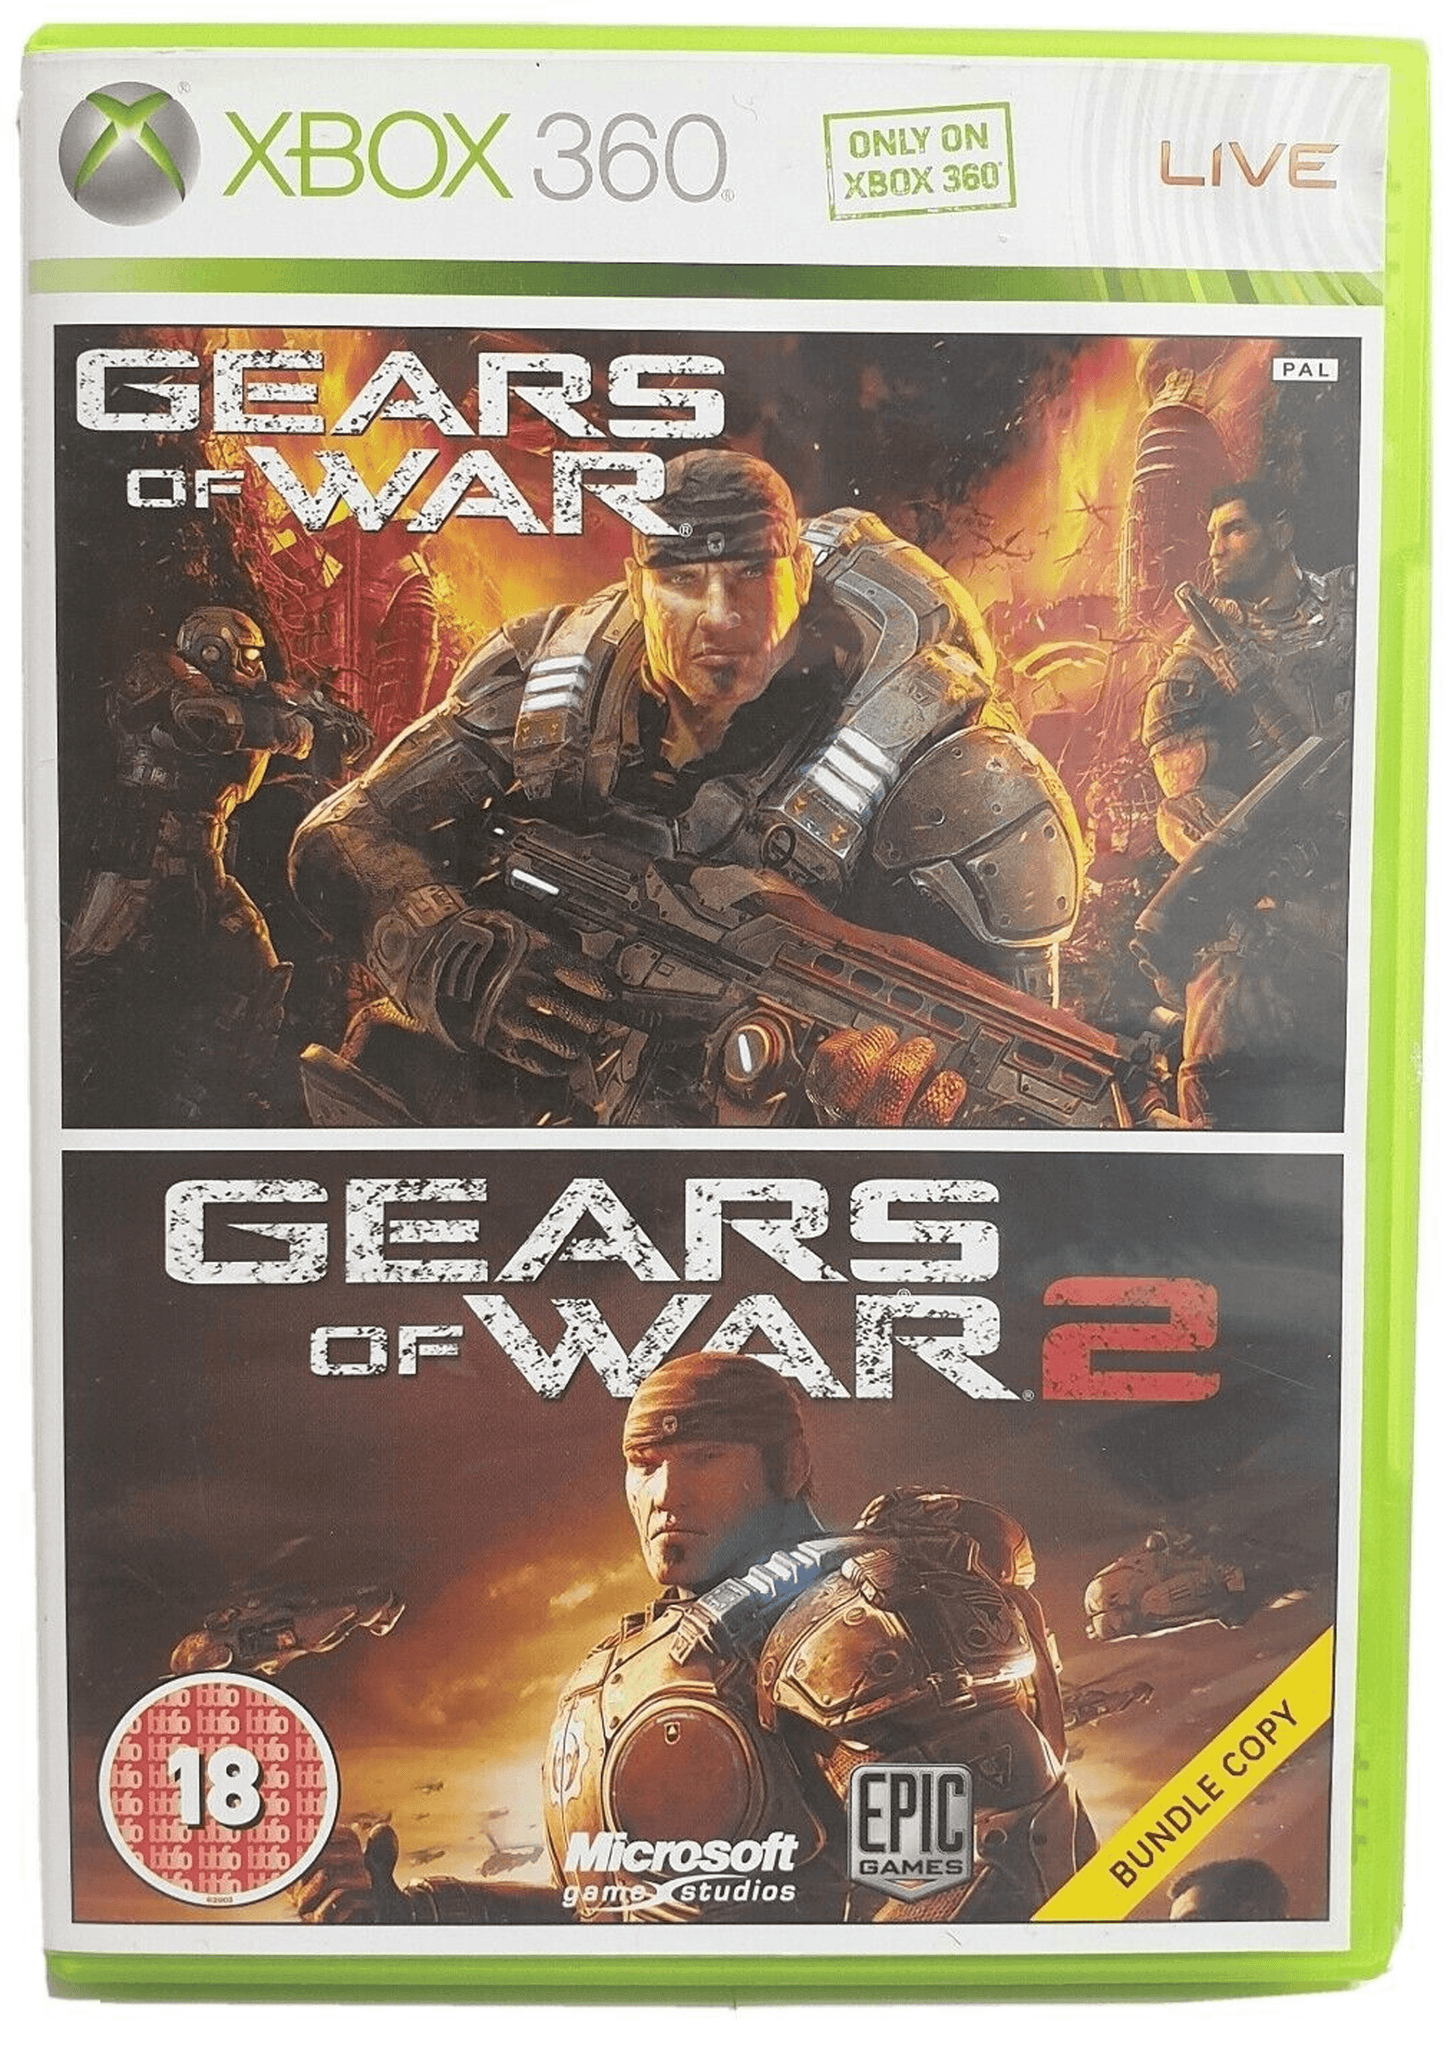 Gears of War Collection Xbox one and 360 - XBox One Jogos - Gameflip